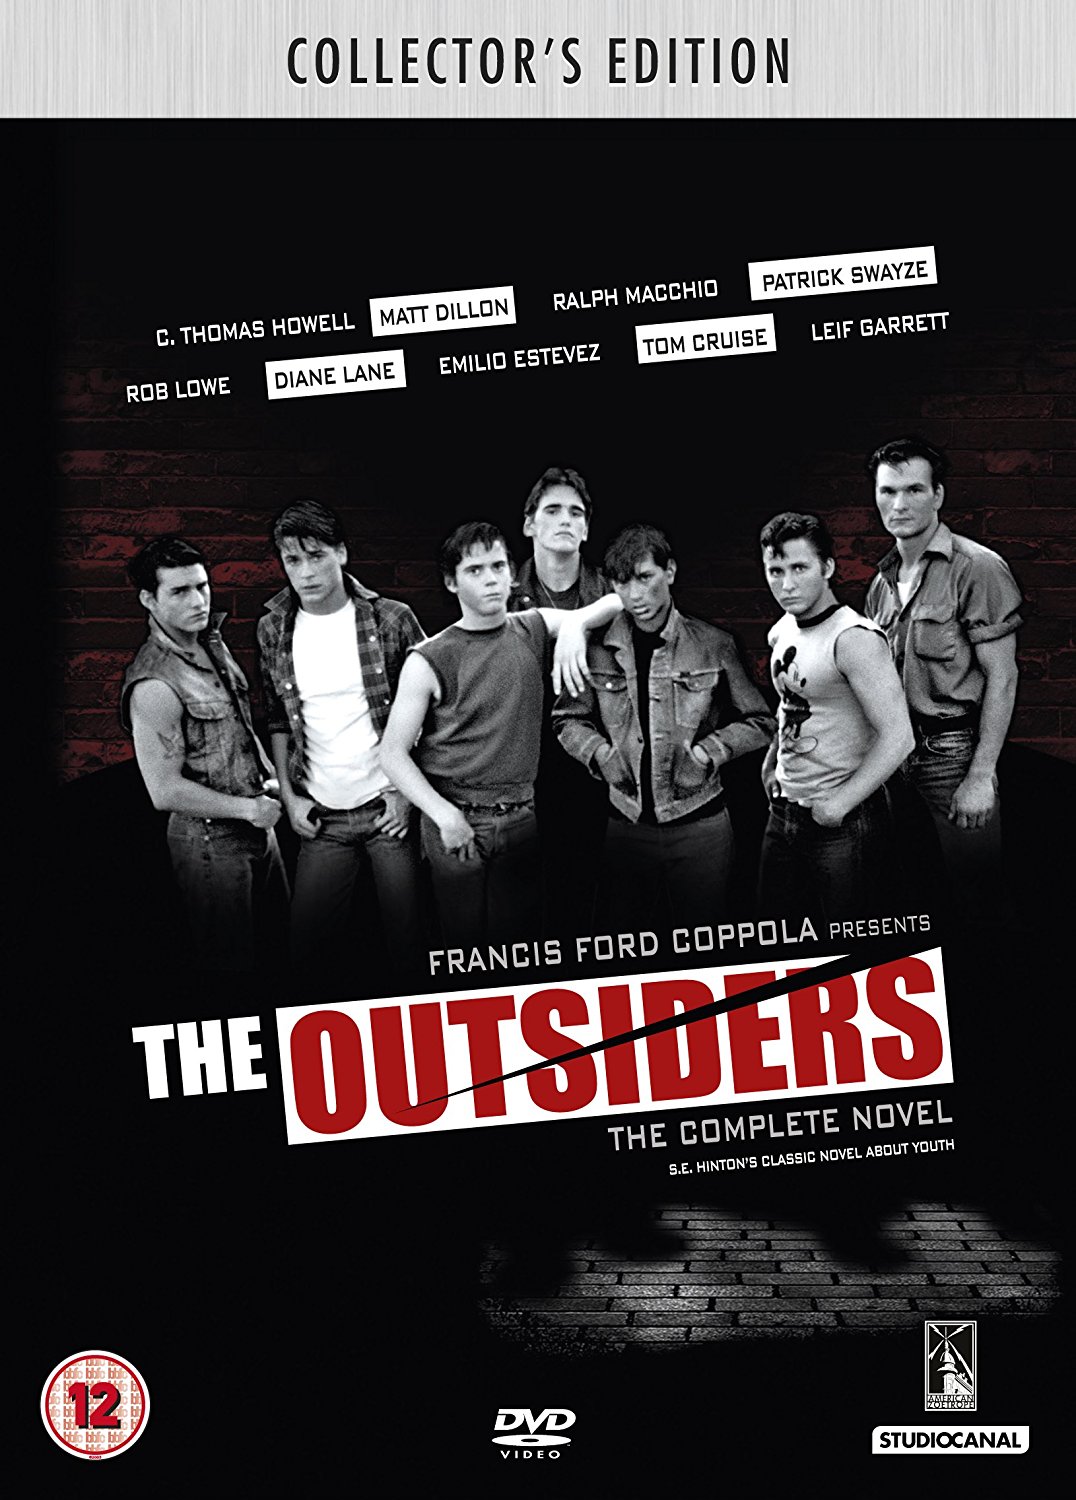 The Outsiders (2 Disc Special Edition) (DVD)